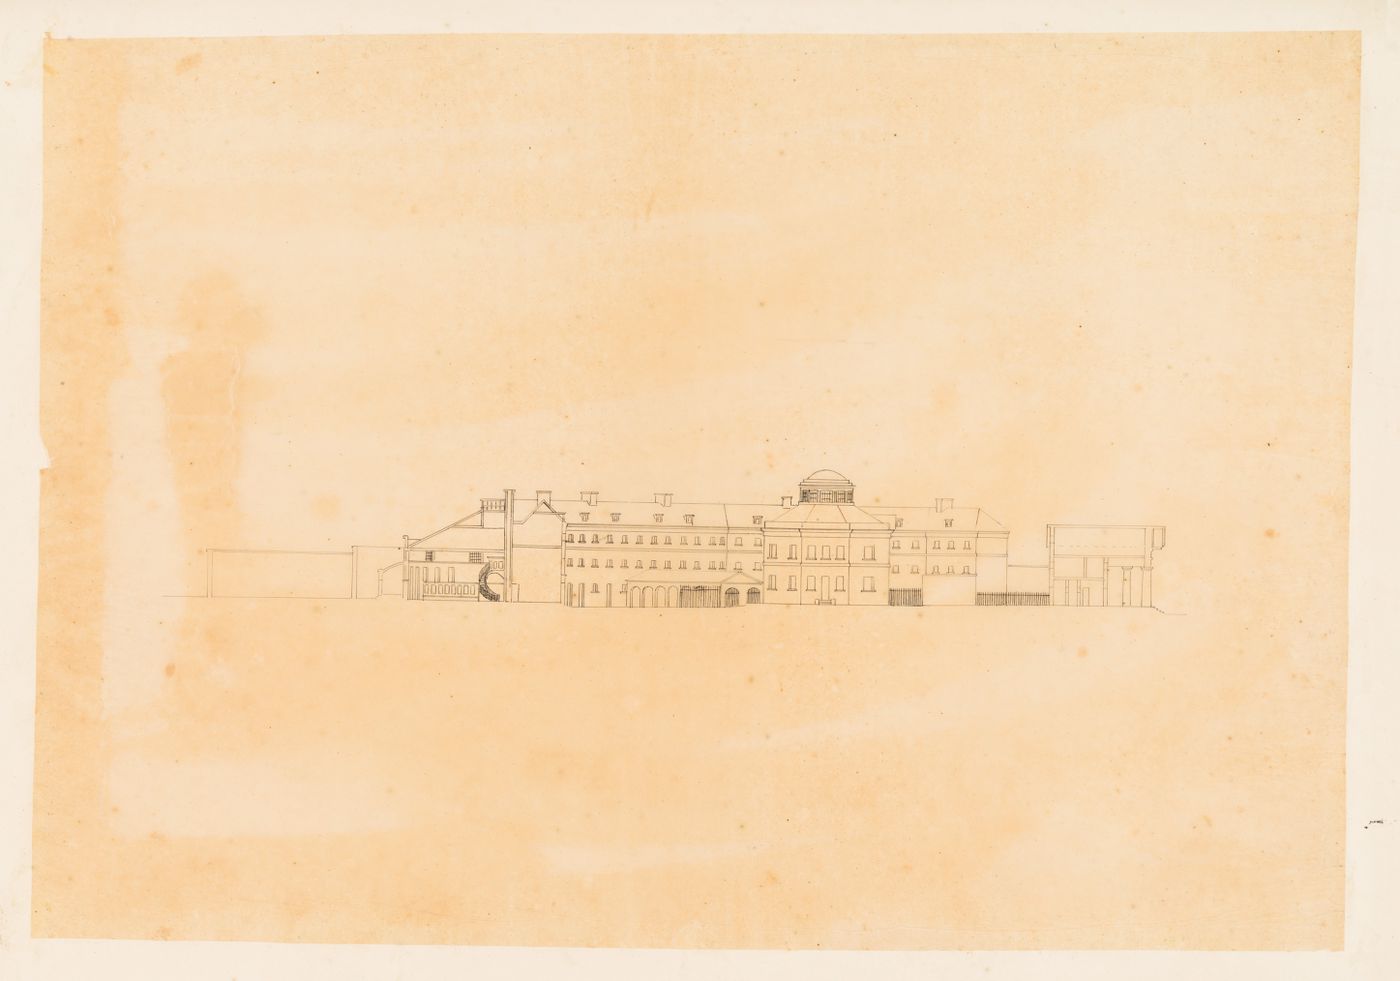 Chester Castle prison and courthouse [?], England: Cross section